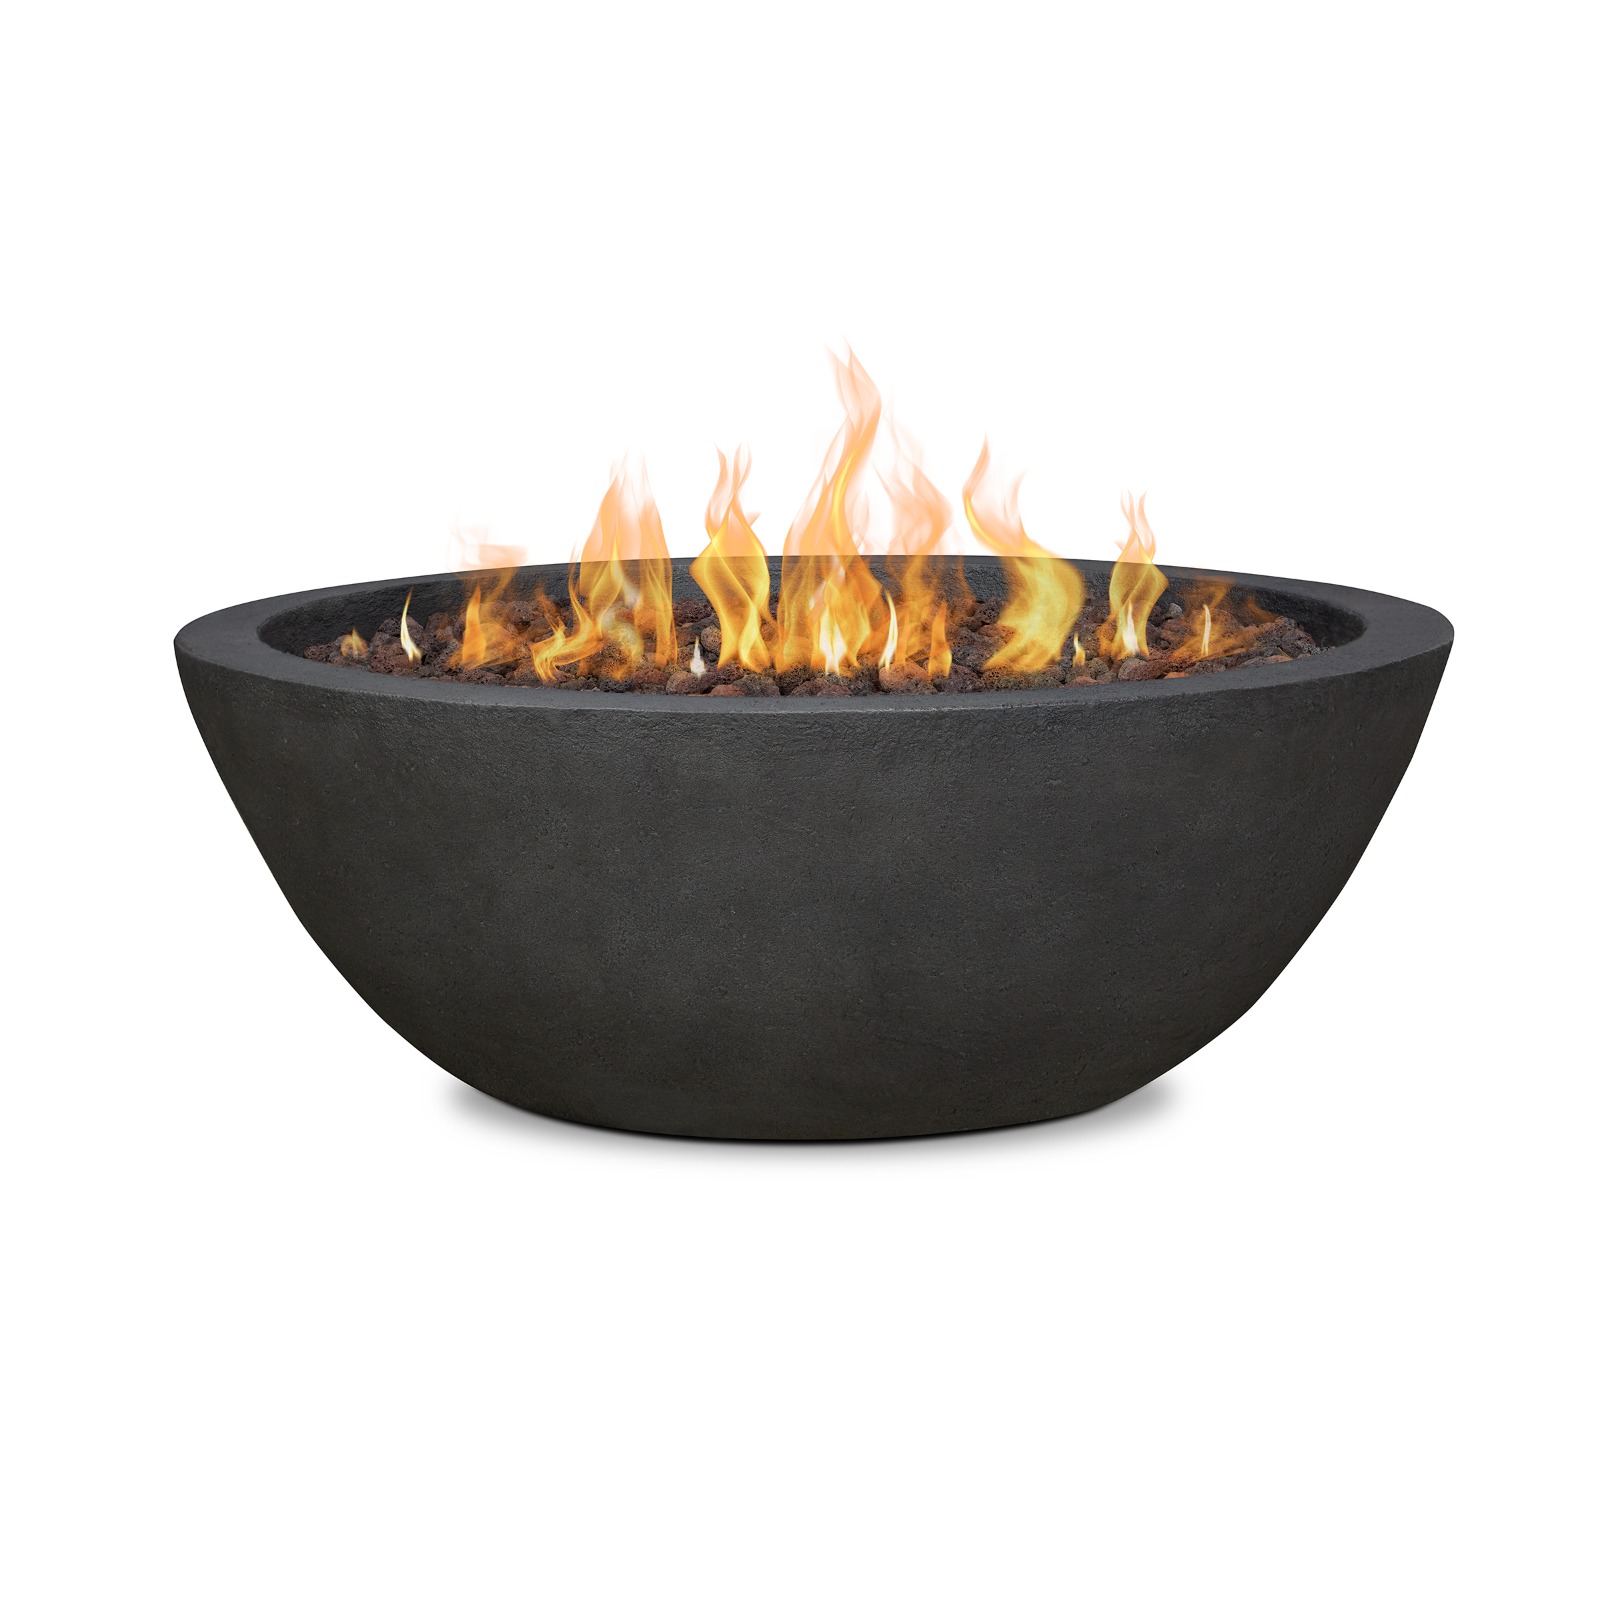 Riverside Propane Fire Pit Fire Bowl Outdoor Fireplace Fire Table for Backyard or Patio